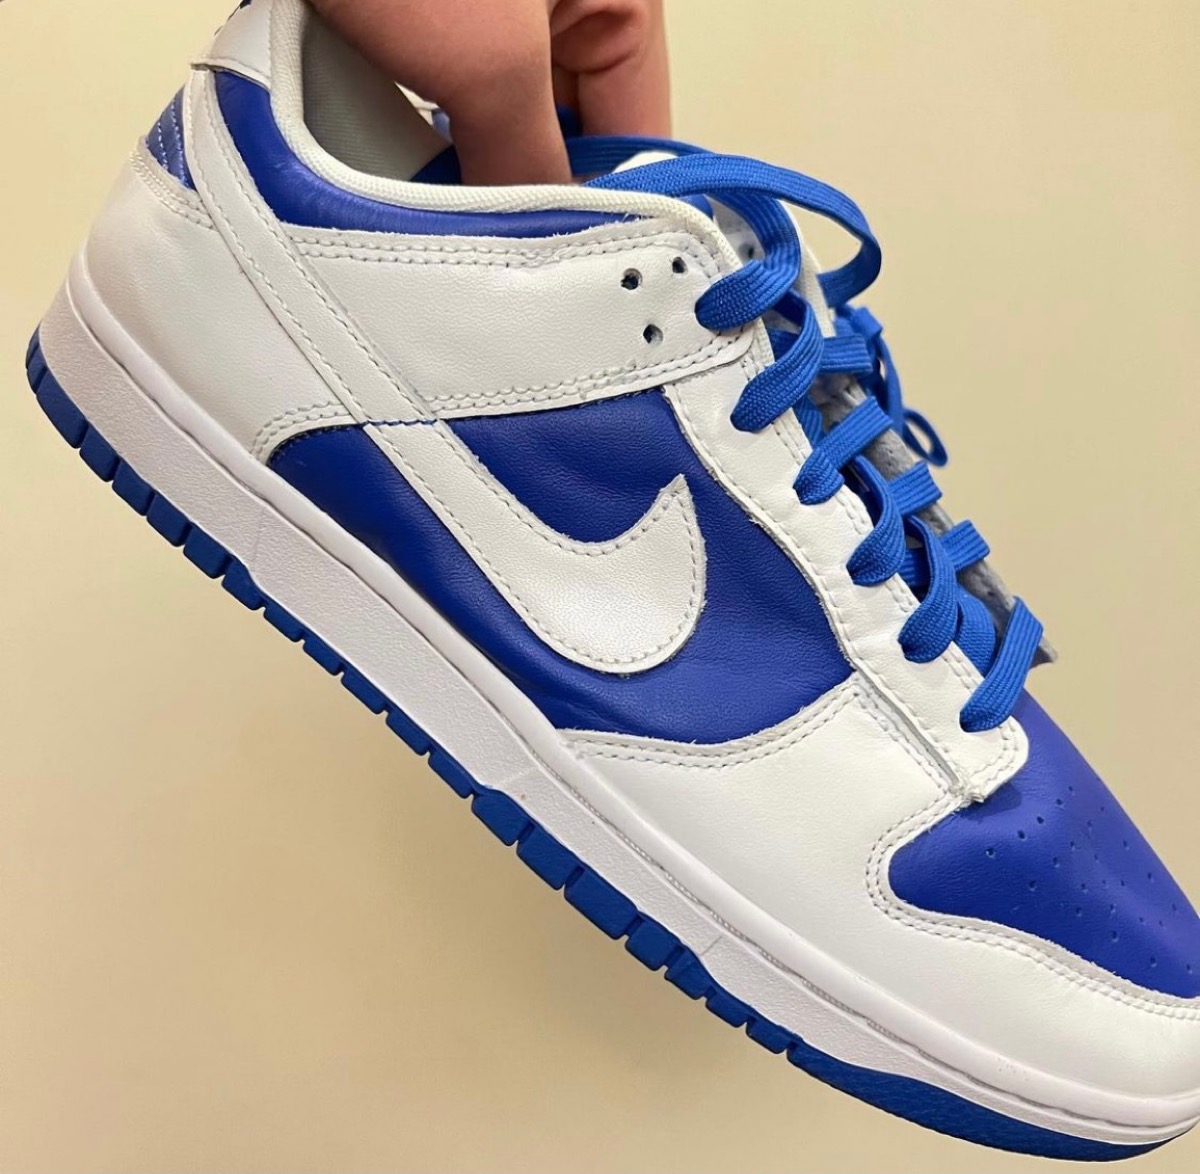 Nike Dunk Low Retro “Racer Blue and White”が国内7月1日に再販予定 